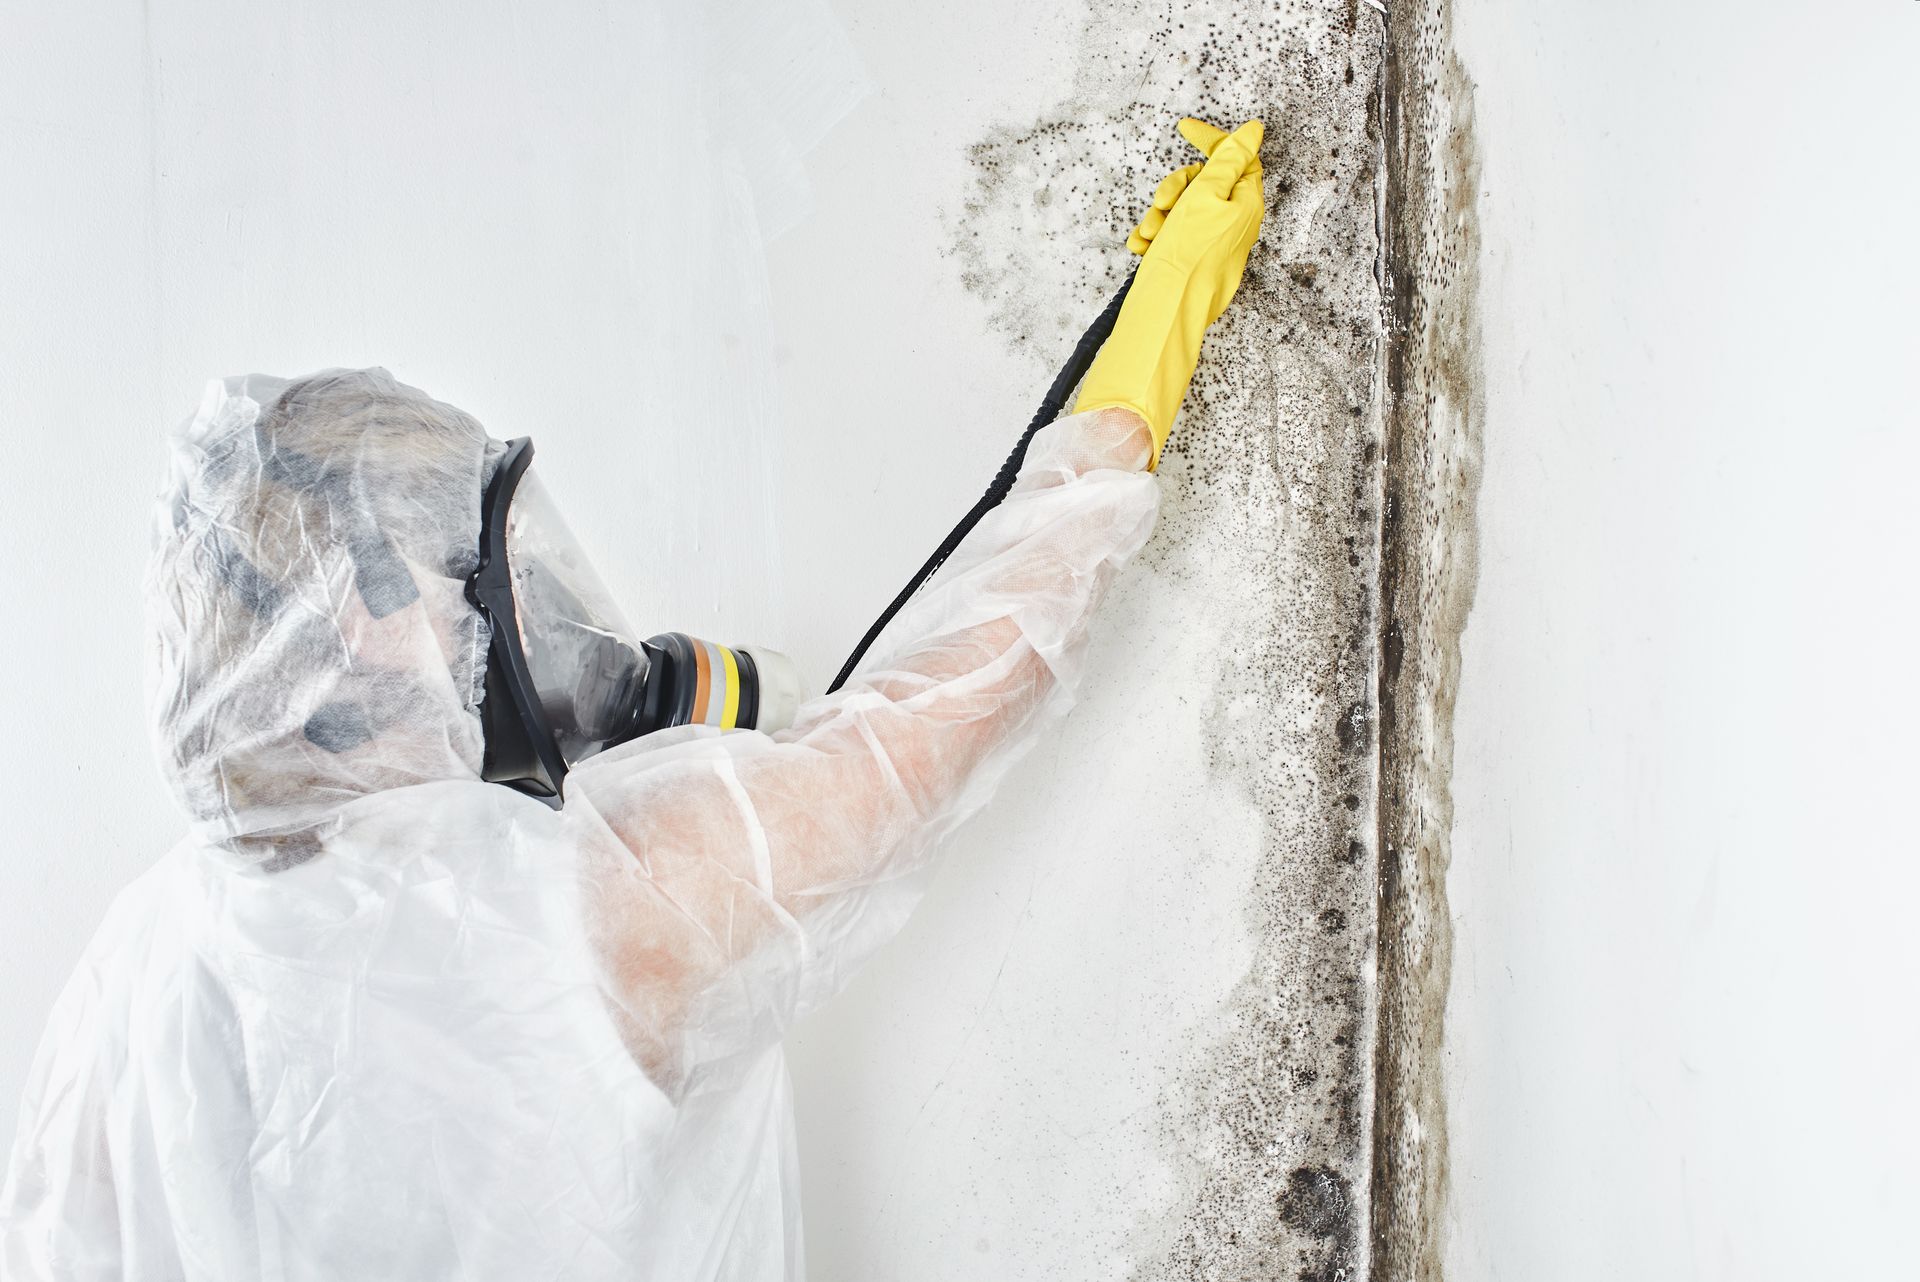 A person in a protective suit is cleaning a wall with a spray bottle.